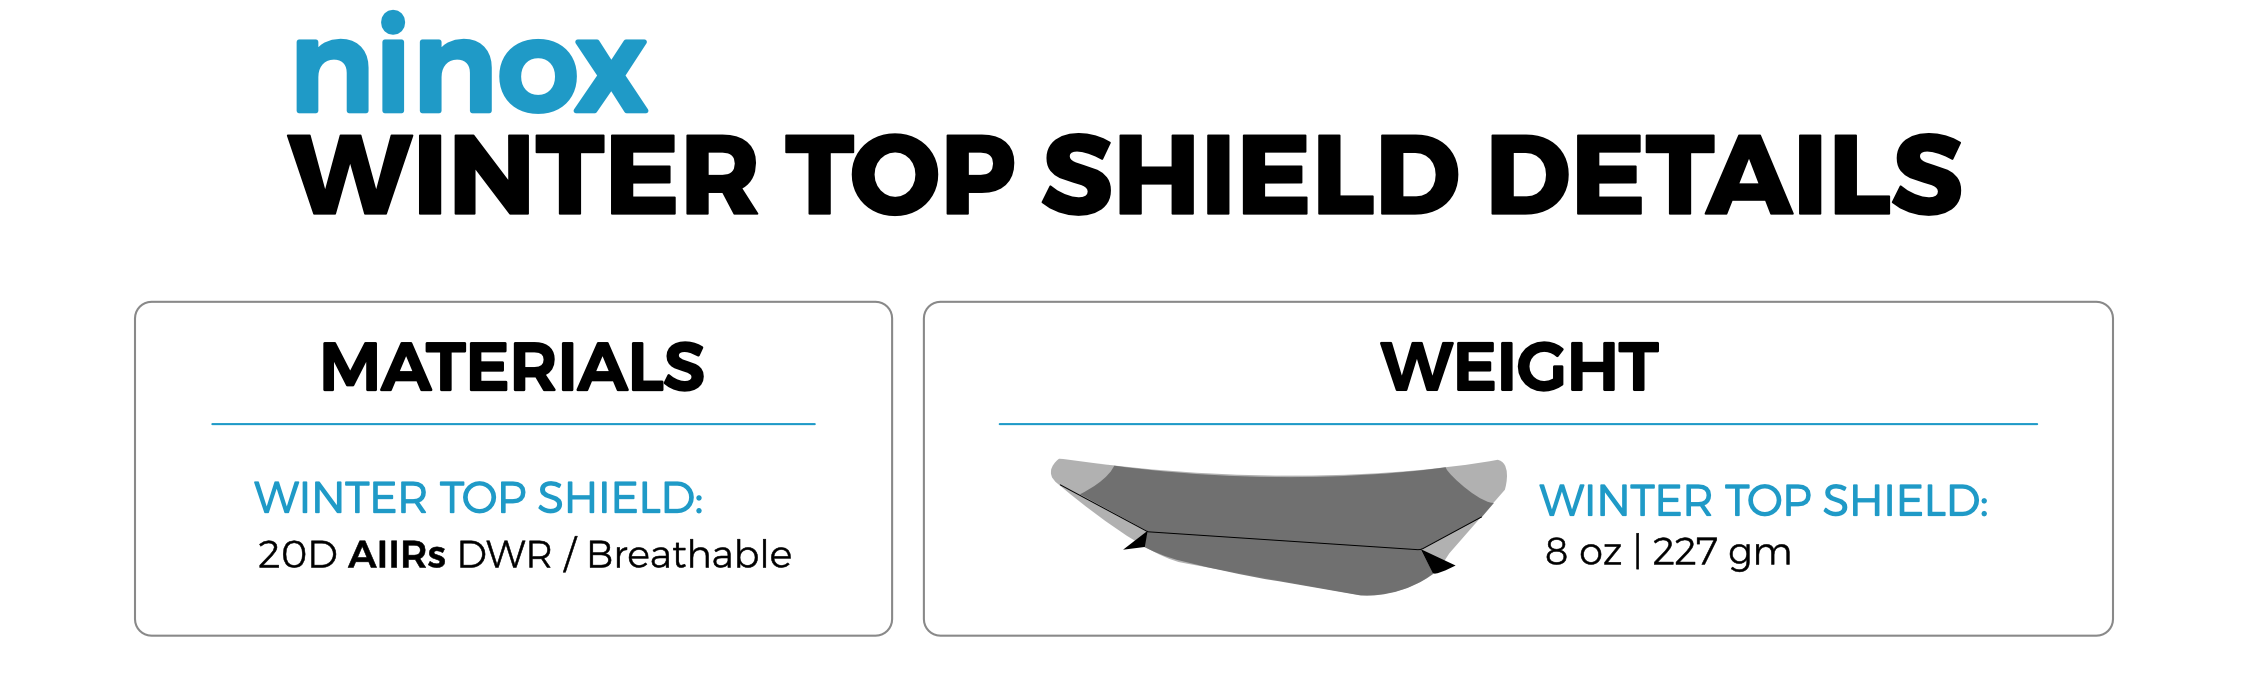 Ninox Winter Shield details and weights. 